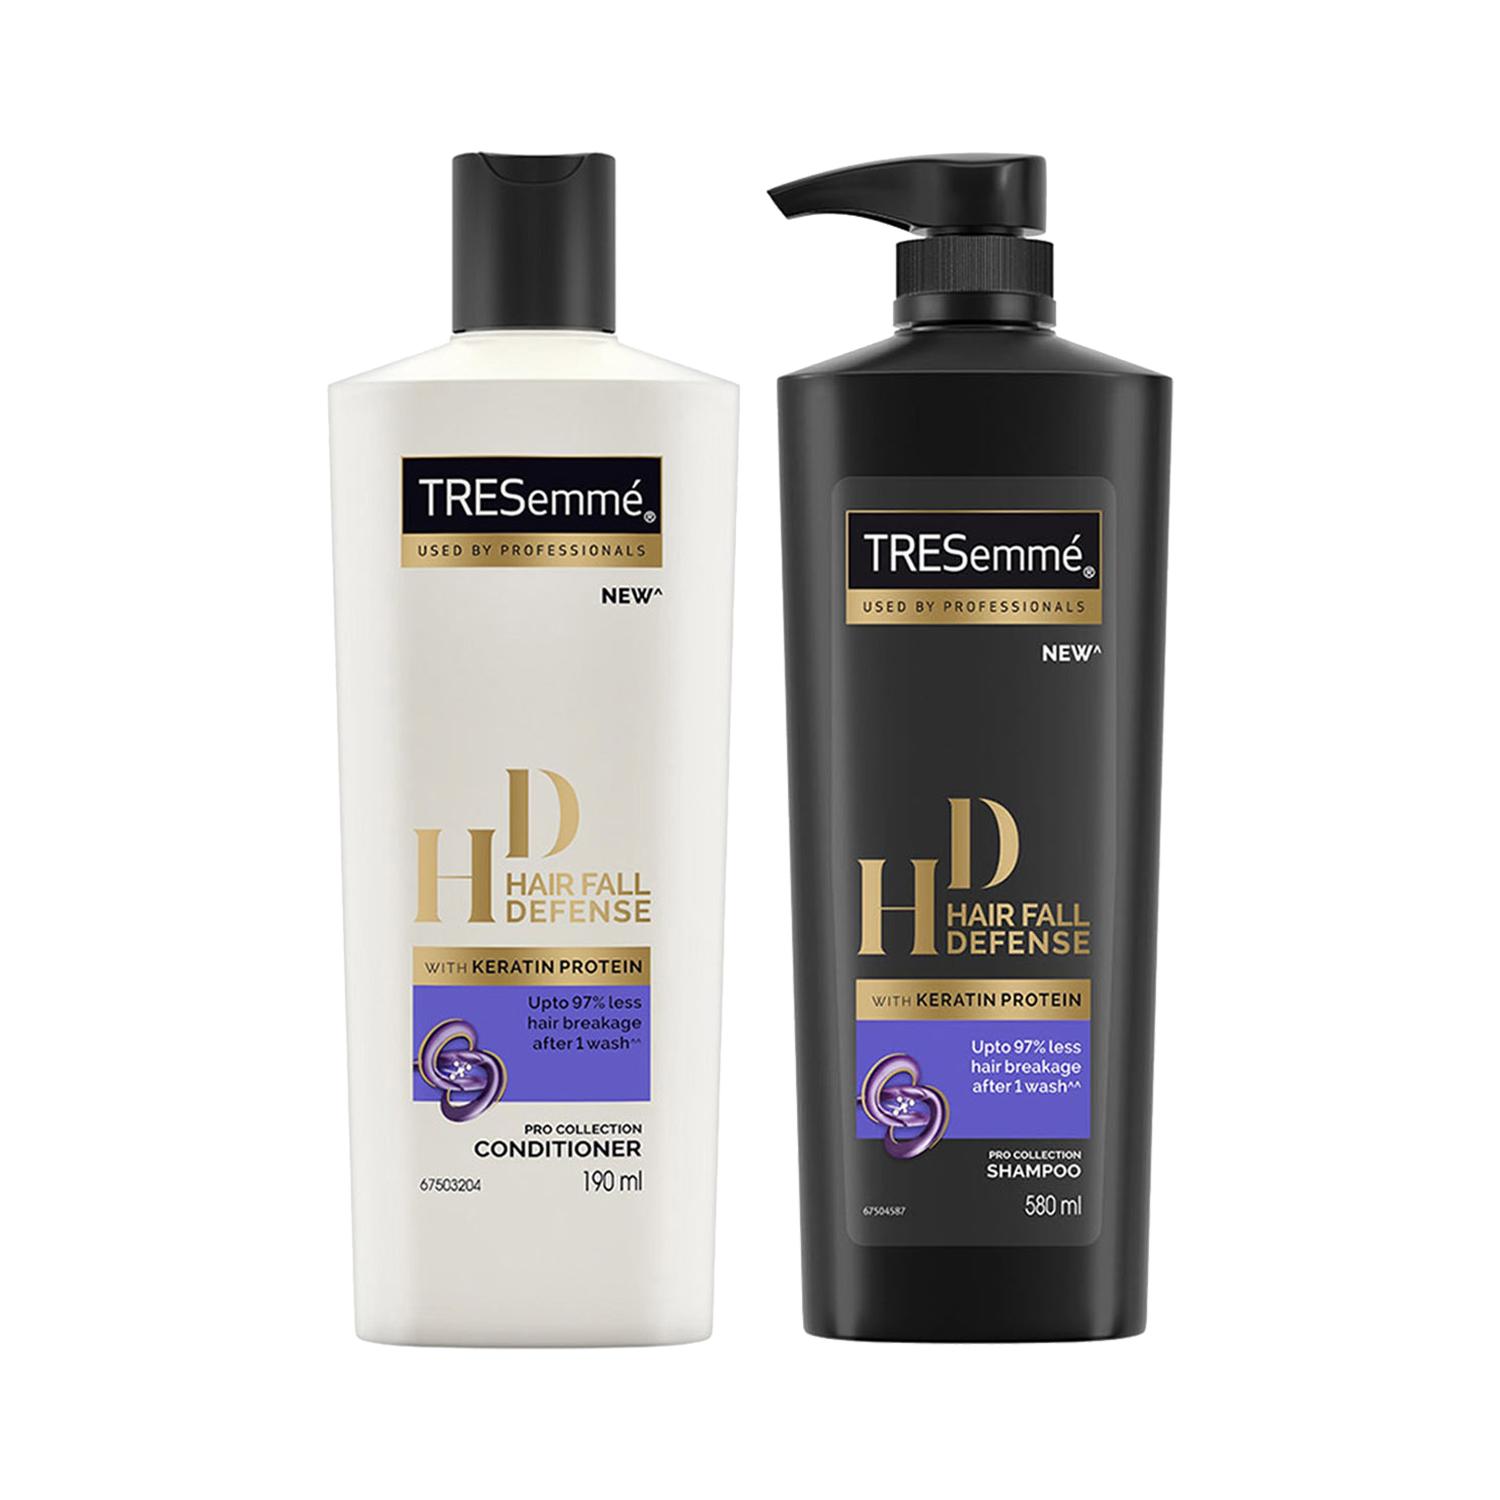 Tresemme | Tresemme Hair Fall Defense Shampoo + Conditioner with Vega Hair Dryer Combo